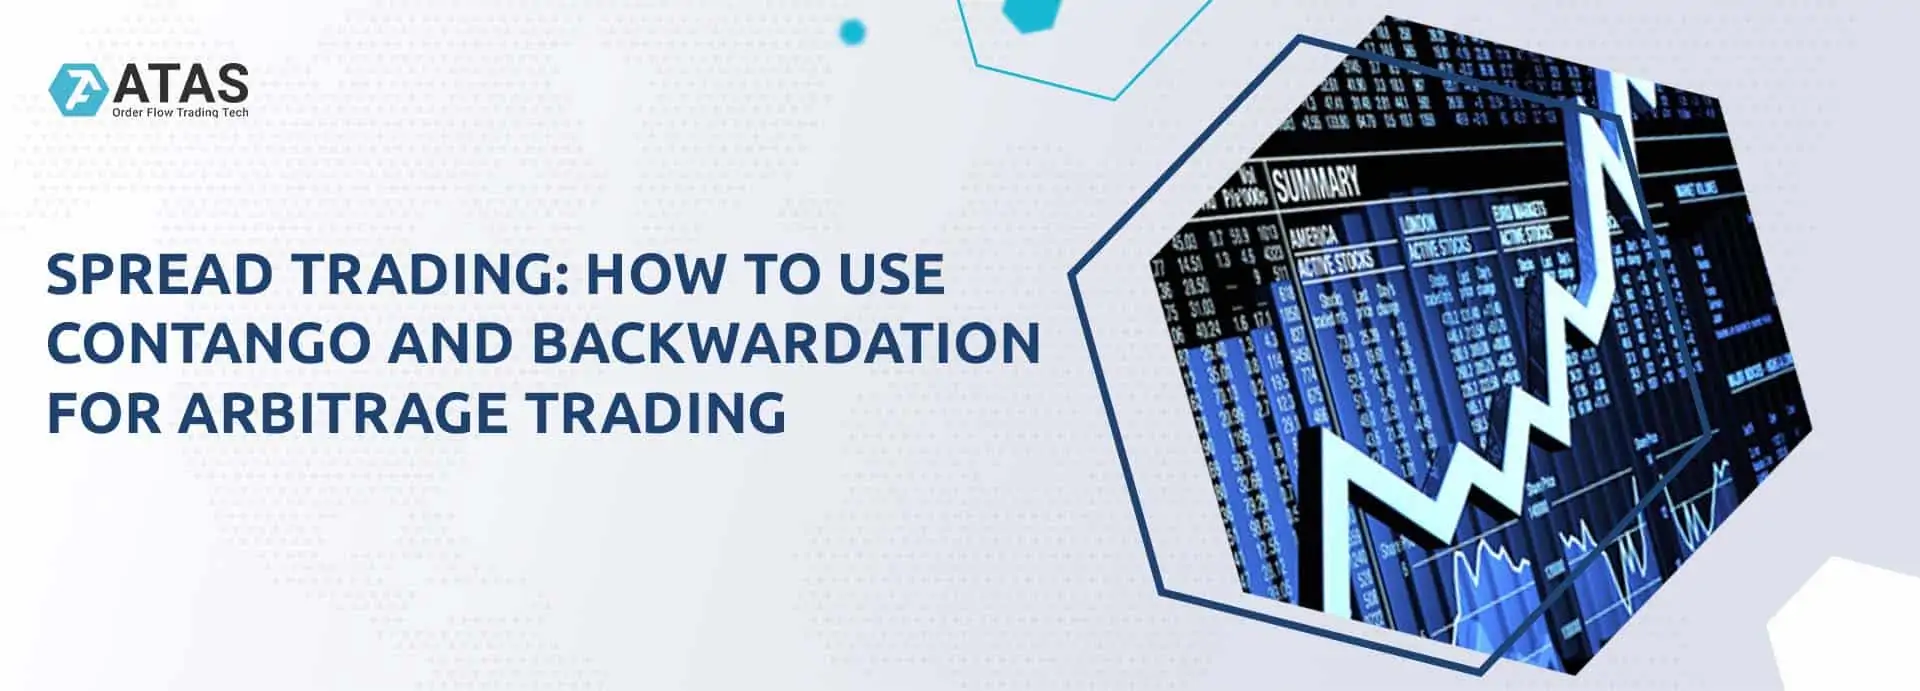 Spread trading: how to use contango and backwardation for arbitrage trading